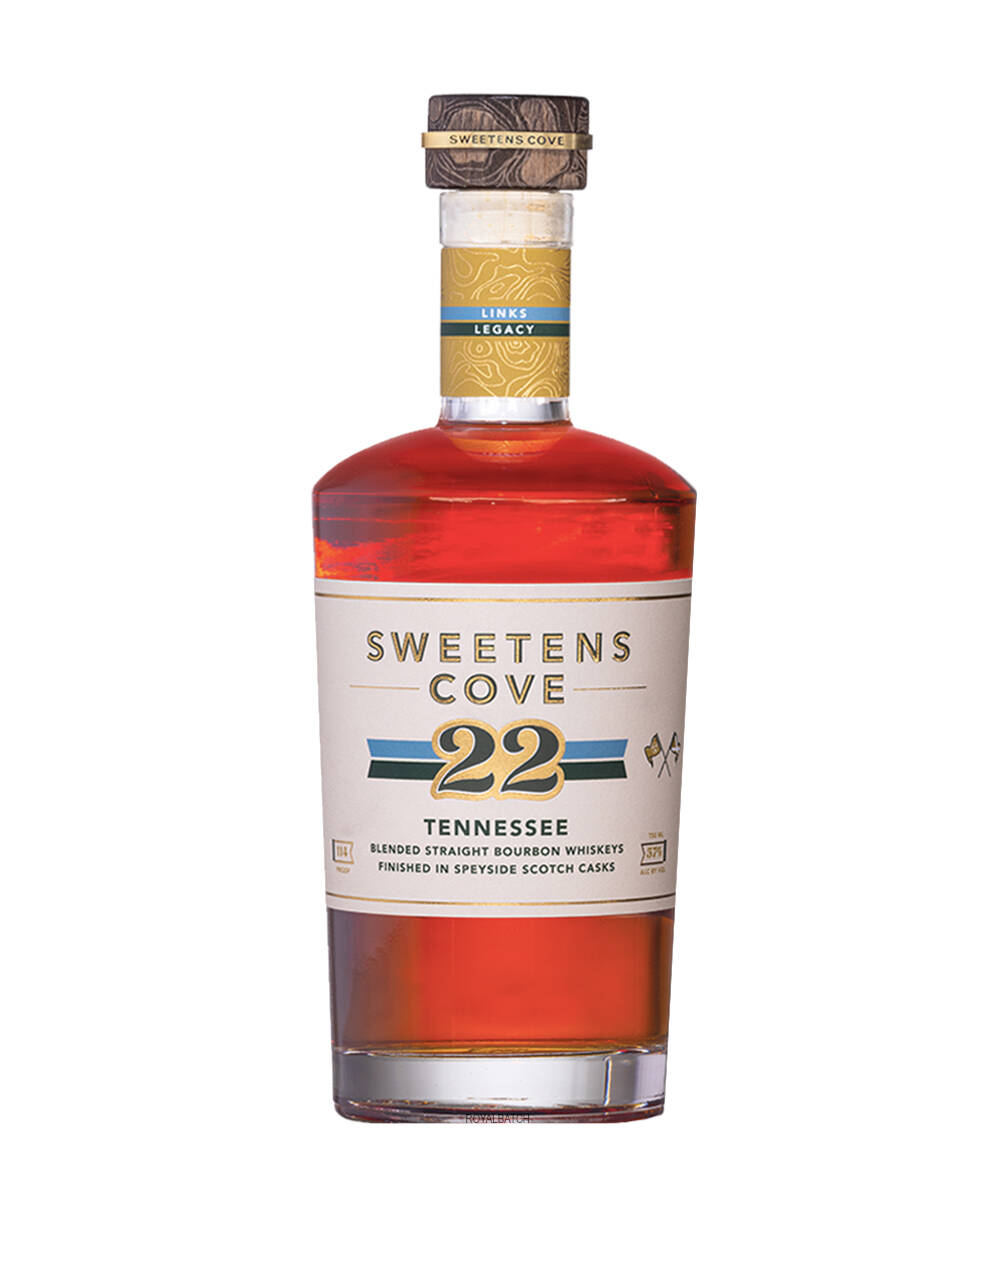 Sweetens Cove 22 Tennessee Bourbon Whiskey